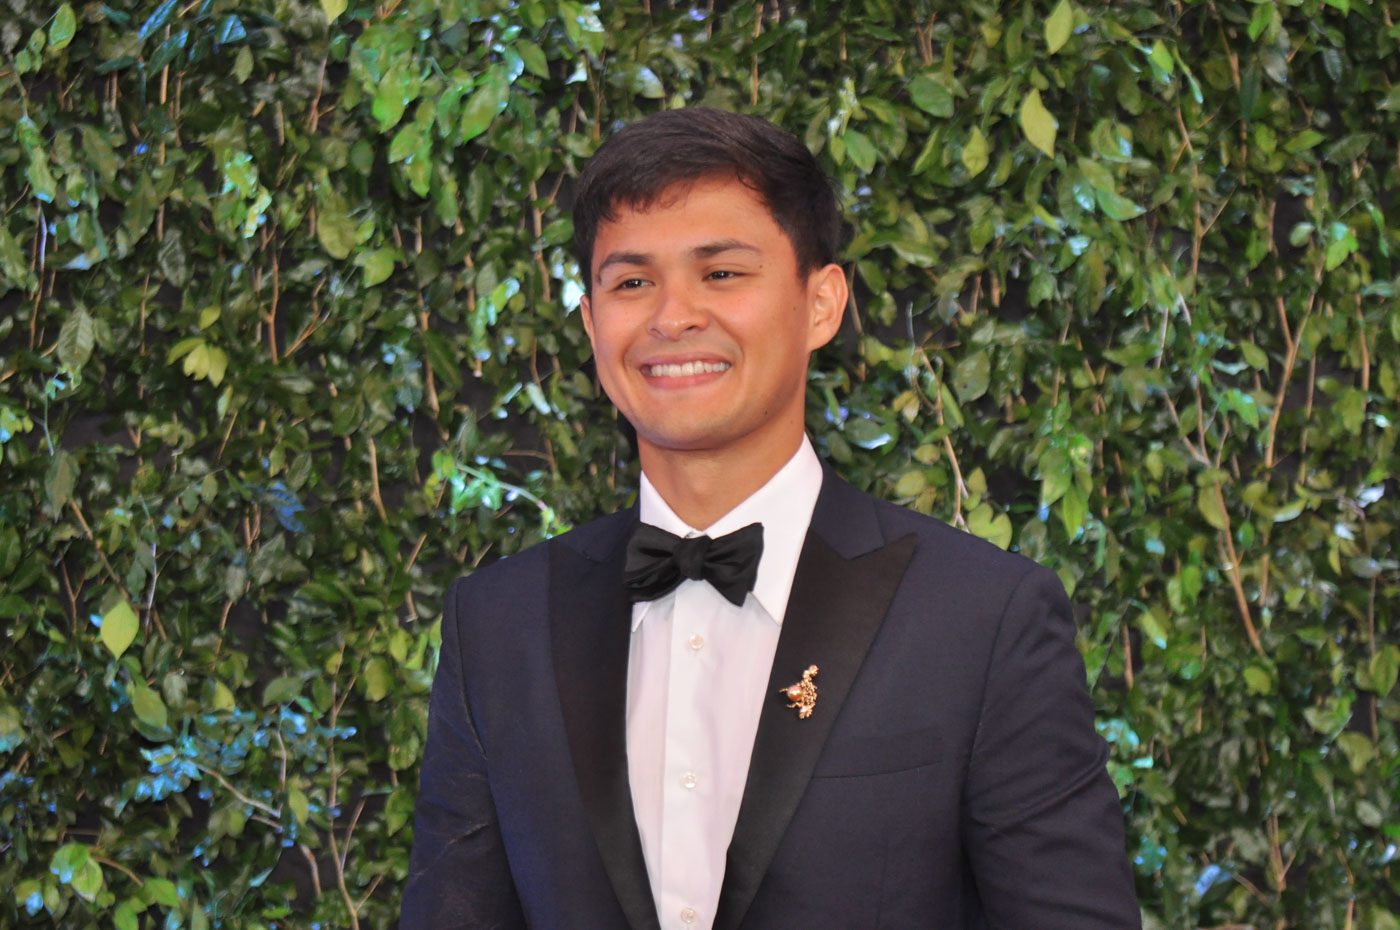 Matteo Guidicelli confirms wedding to Sarah Geronimo, denies punching incident at ceremony